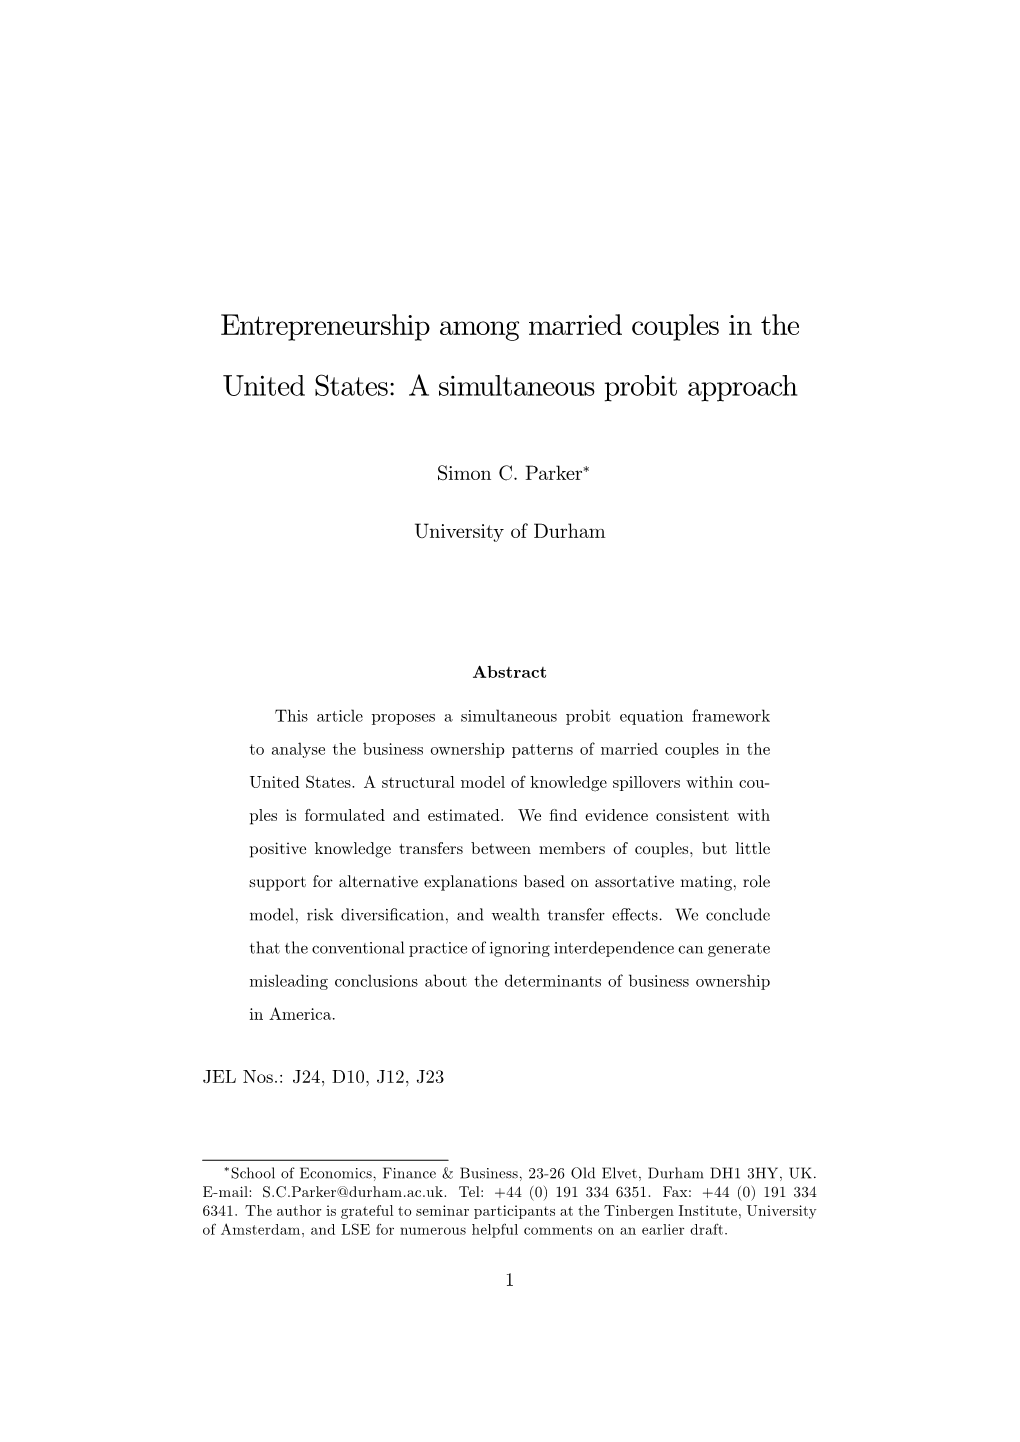 Entrepreneurship Among Married Couples in the US